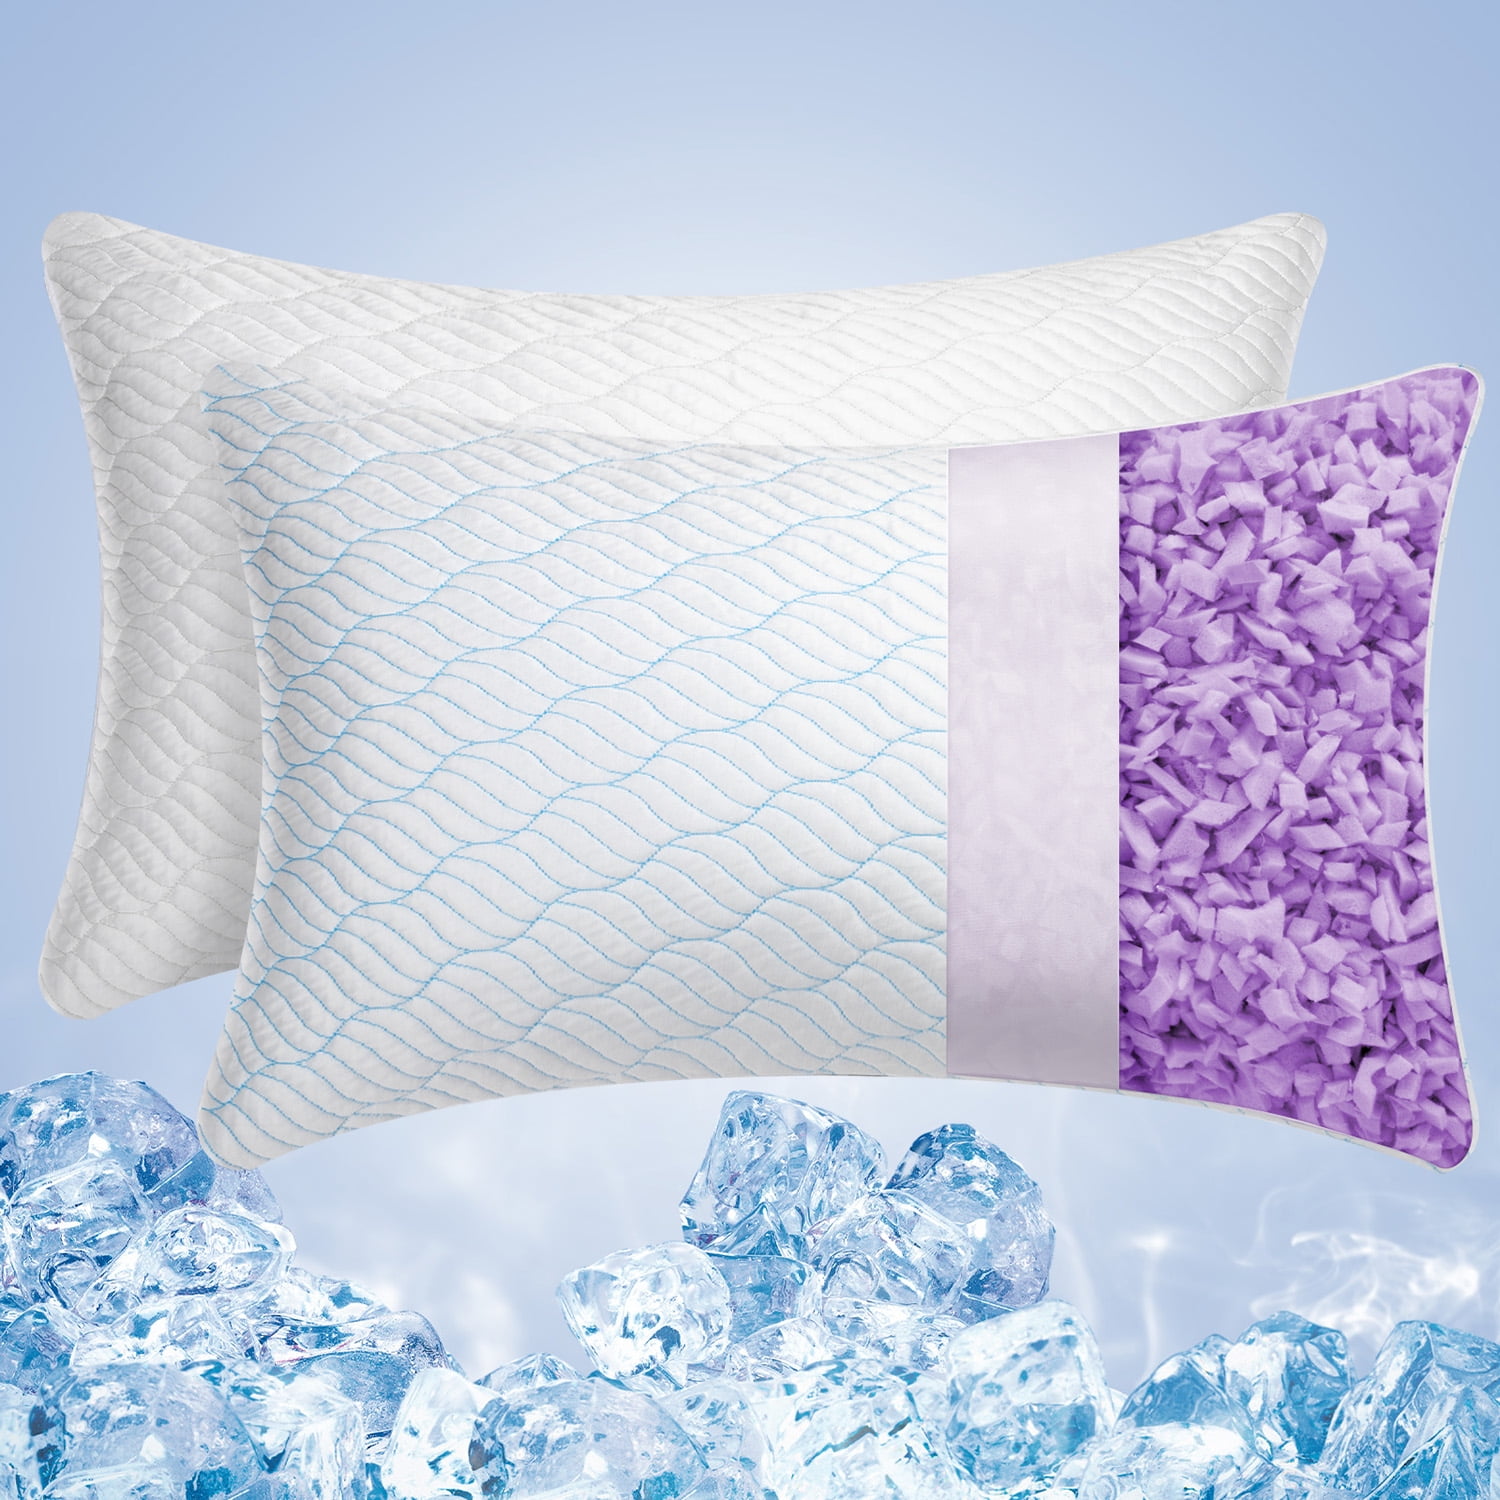 ESHINE Memory Foam Pillows Queen Size Set of 2 - Cooling Pillows, Gel  Infused Cool Pillow, Silky Ice Fabric and Soft Bamboo Rayon, Breathable  Queen